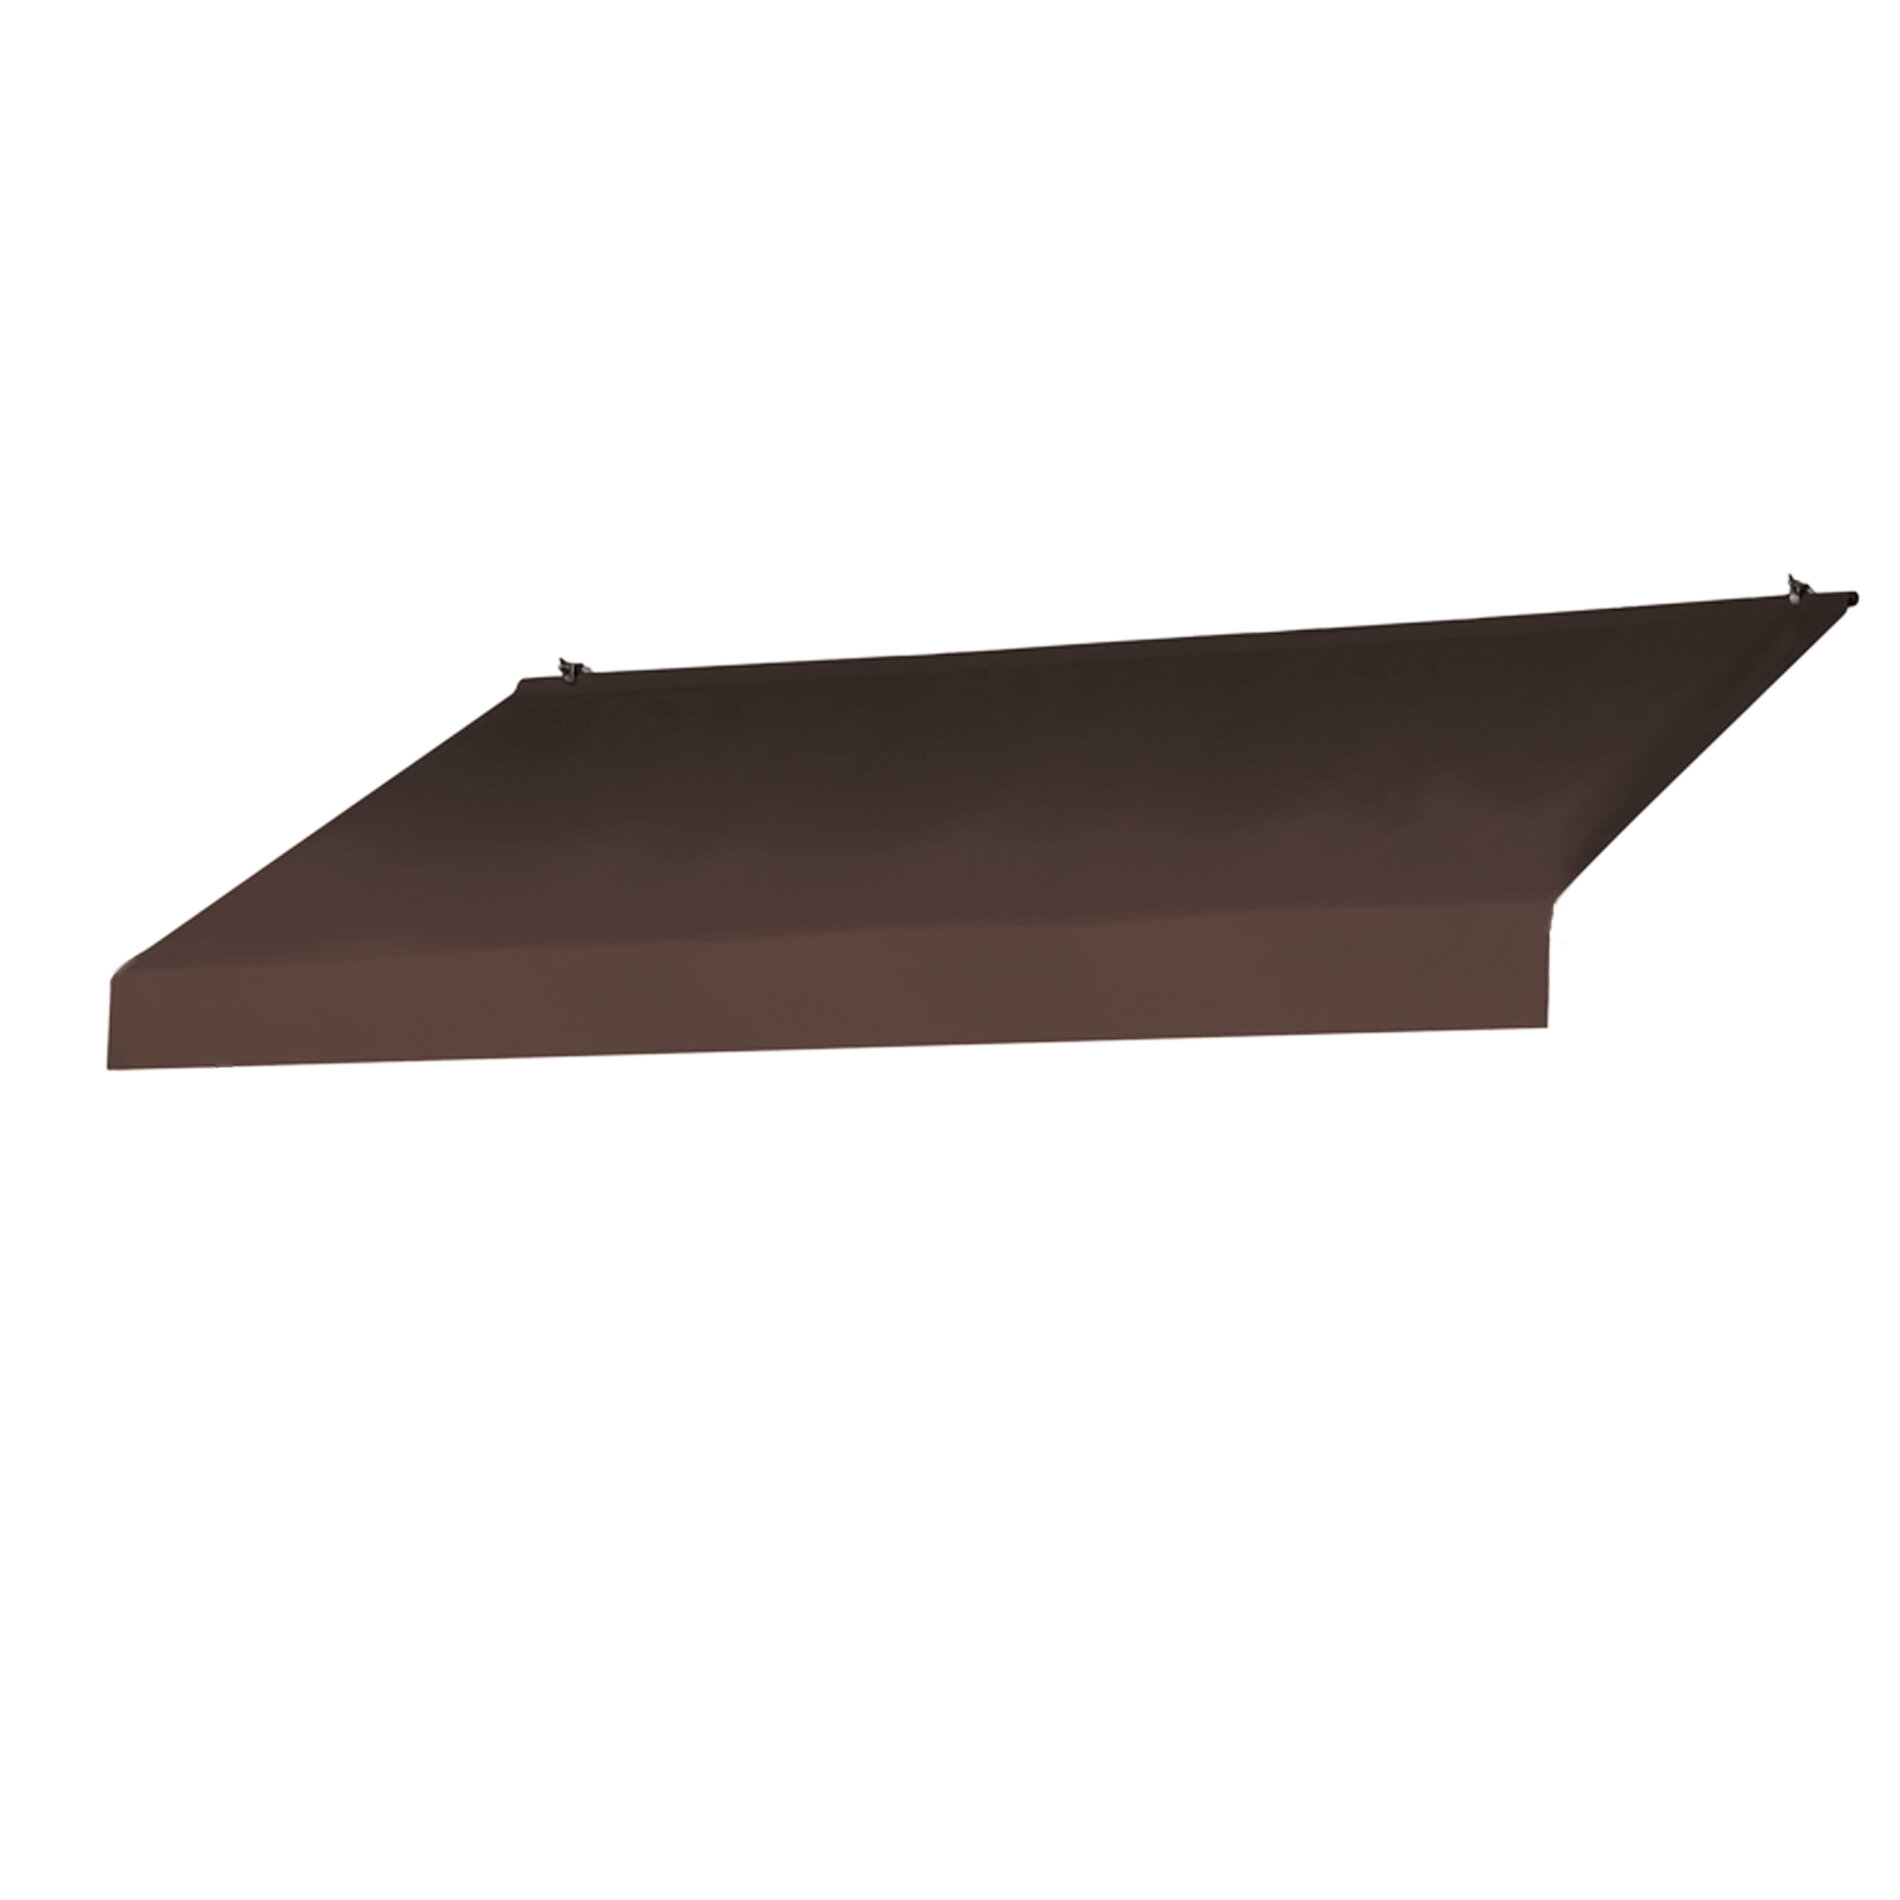 4' Awnings In A Box Traditional Style Cocoa Brown New Complete Awning Kit